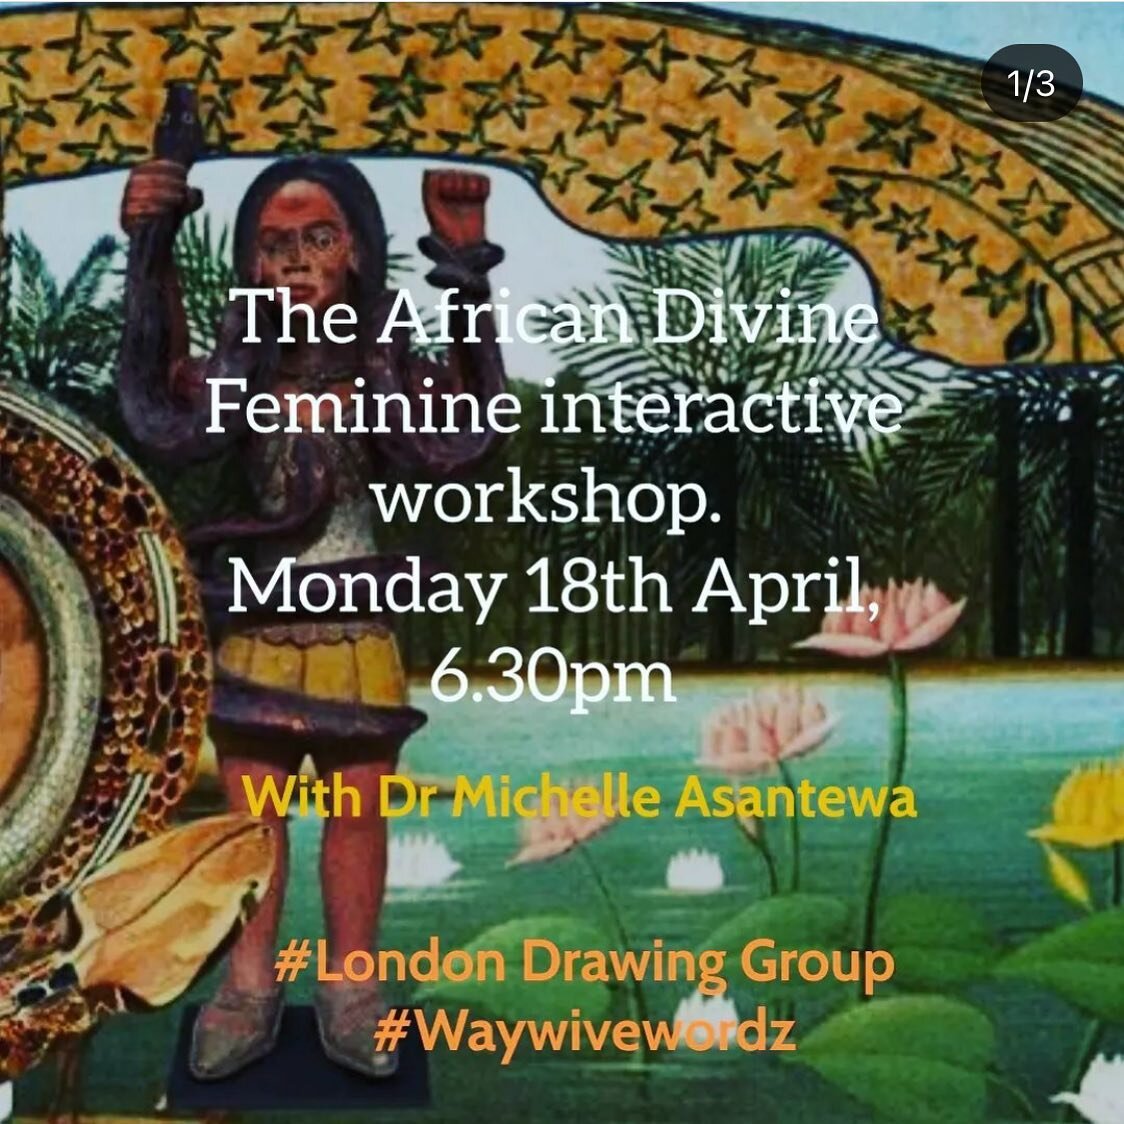 Next up on our Monday evening Feminist Lecture Program! We&rsquo;re switching it up with an interactive lecture/workshop! We&rsquo;re thrilled to welcome back @michelleyaaasantewa for this unique session exploring THE AFRICAN DIVINE FEMININE!
&bull;
